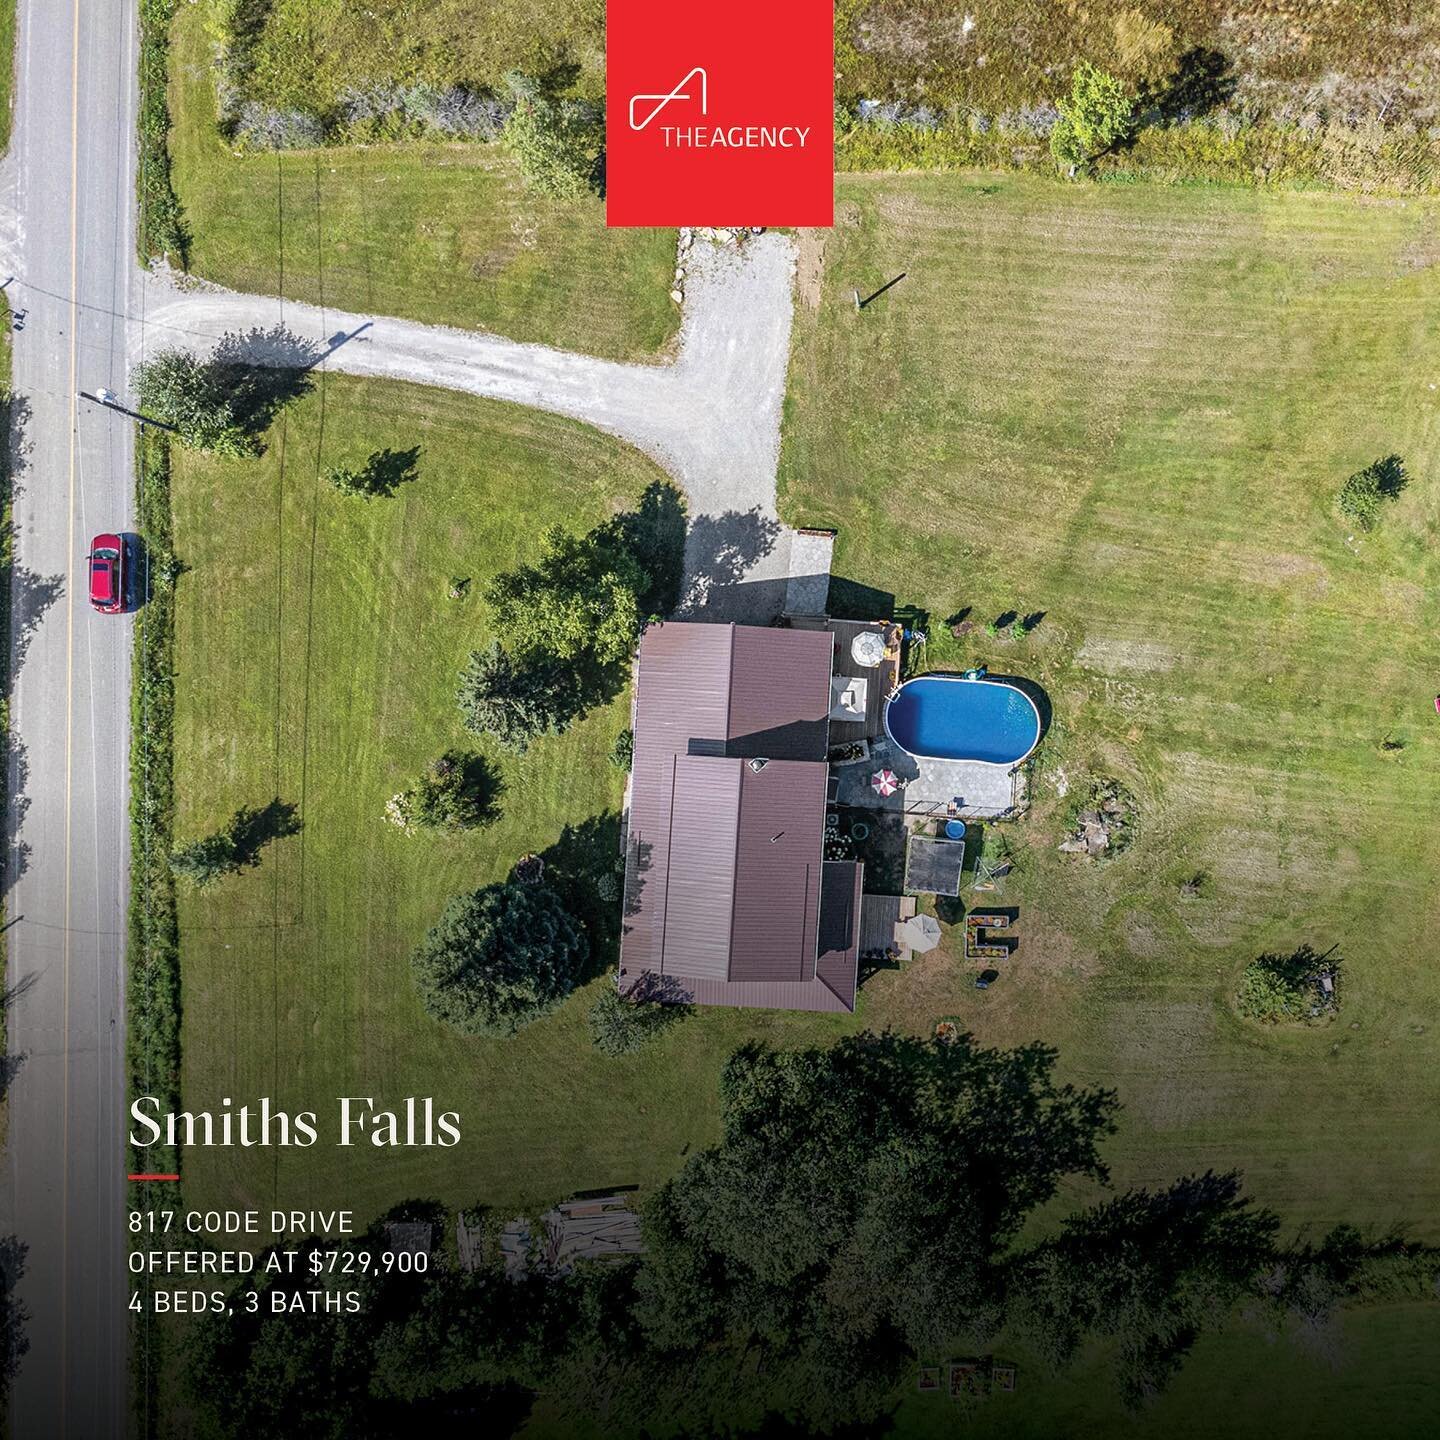 JUST LISTED | 817 Code Drive, Smiths Falls

Offered at $729,900

An entertainer's dream property. This two-storey, four-bedroom, two-and-a-half bathroom home sits on 1.42 acres of level, clear land. Located just 4 minutes to downtown Smiths Falls, yo